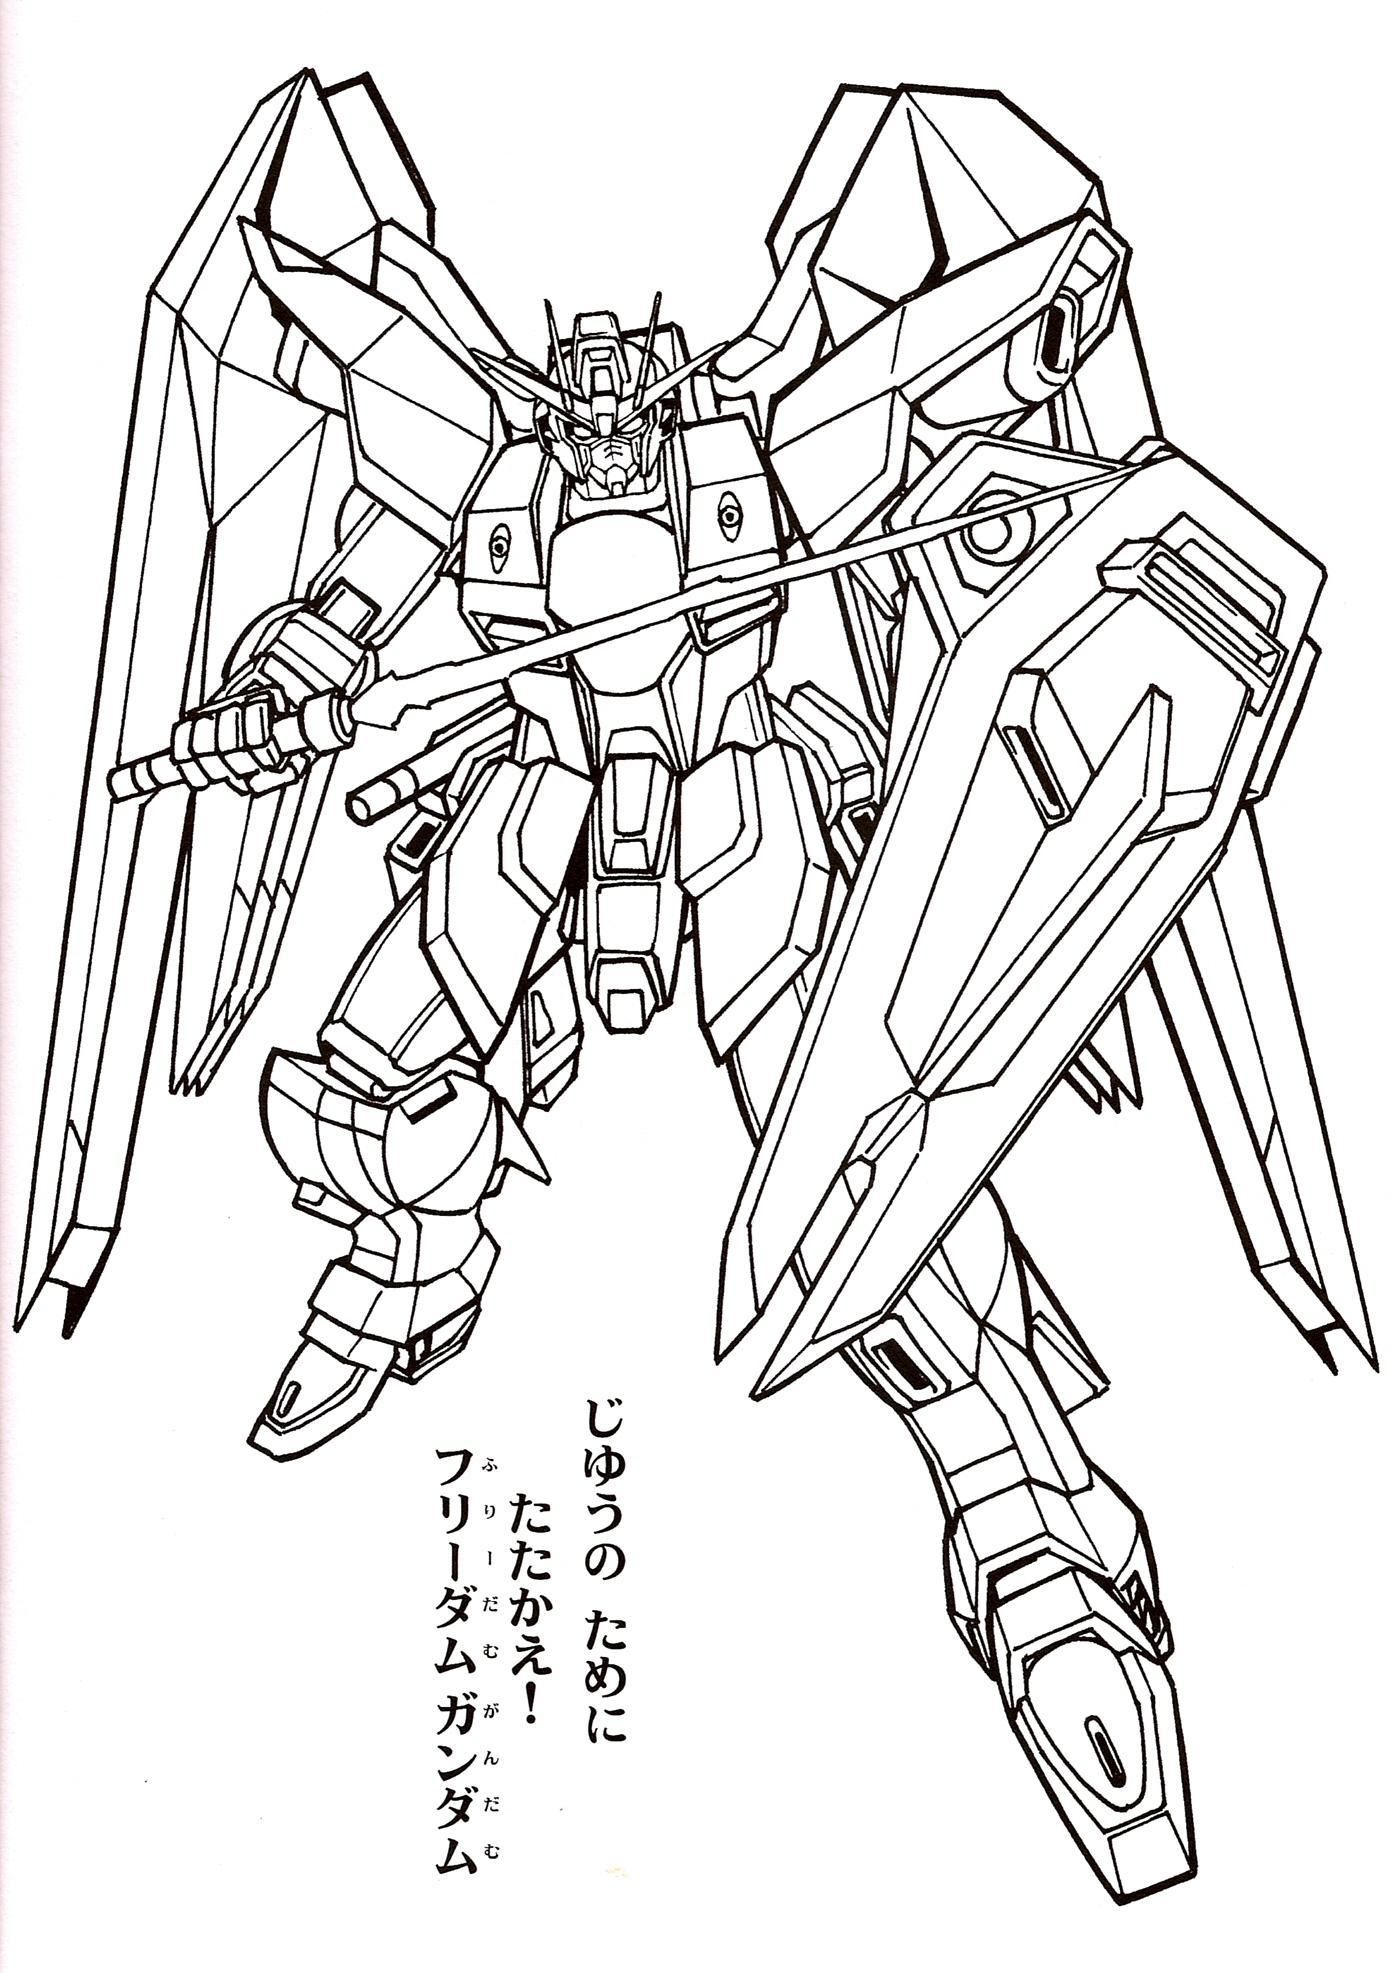 Free coloring pages of gundam | Free coloring pages, Coloring pages